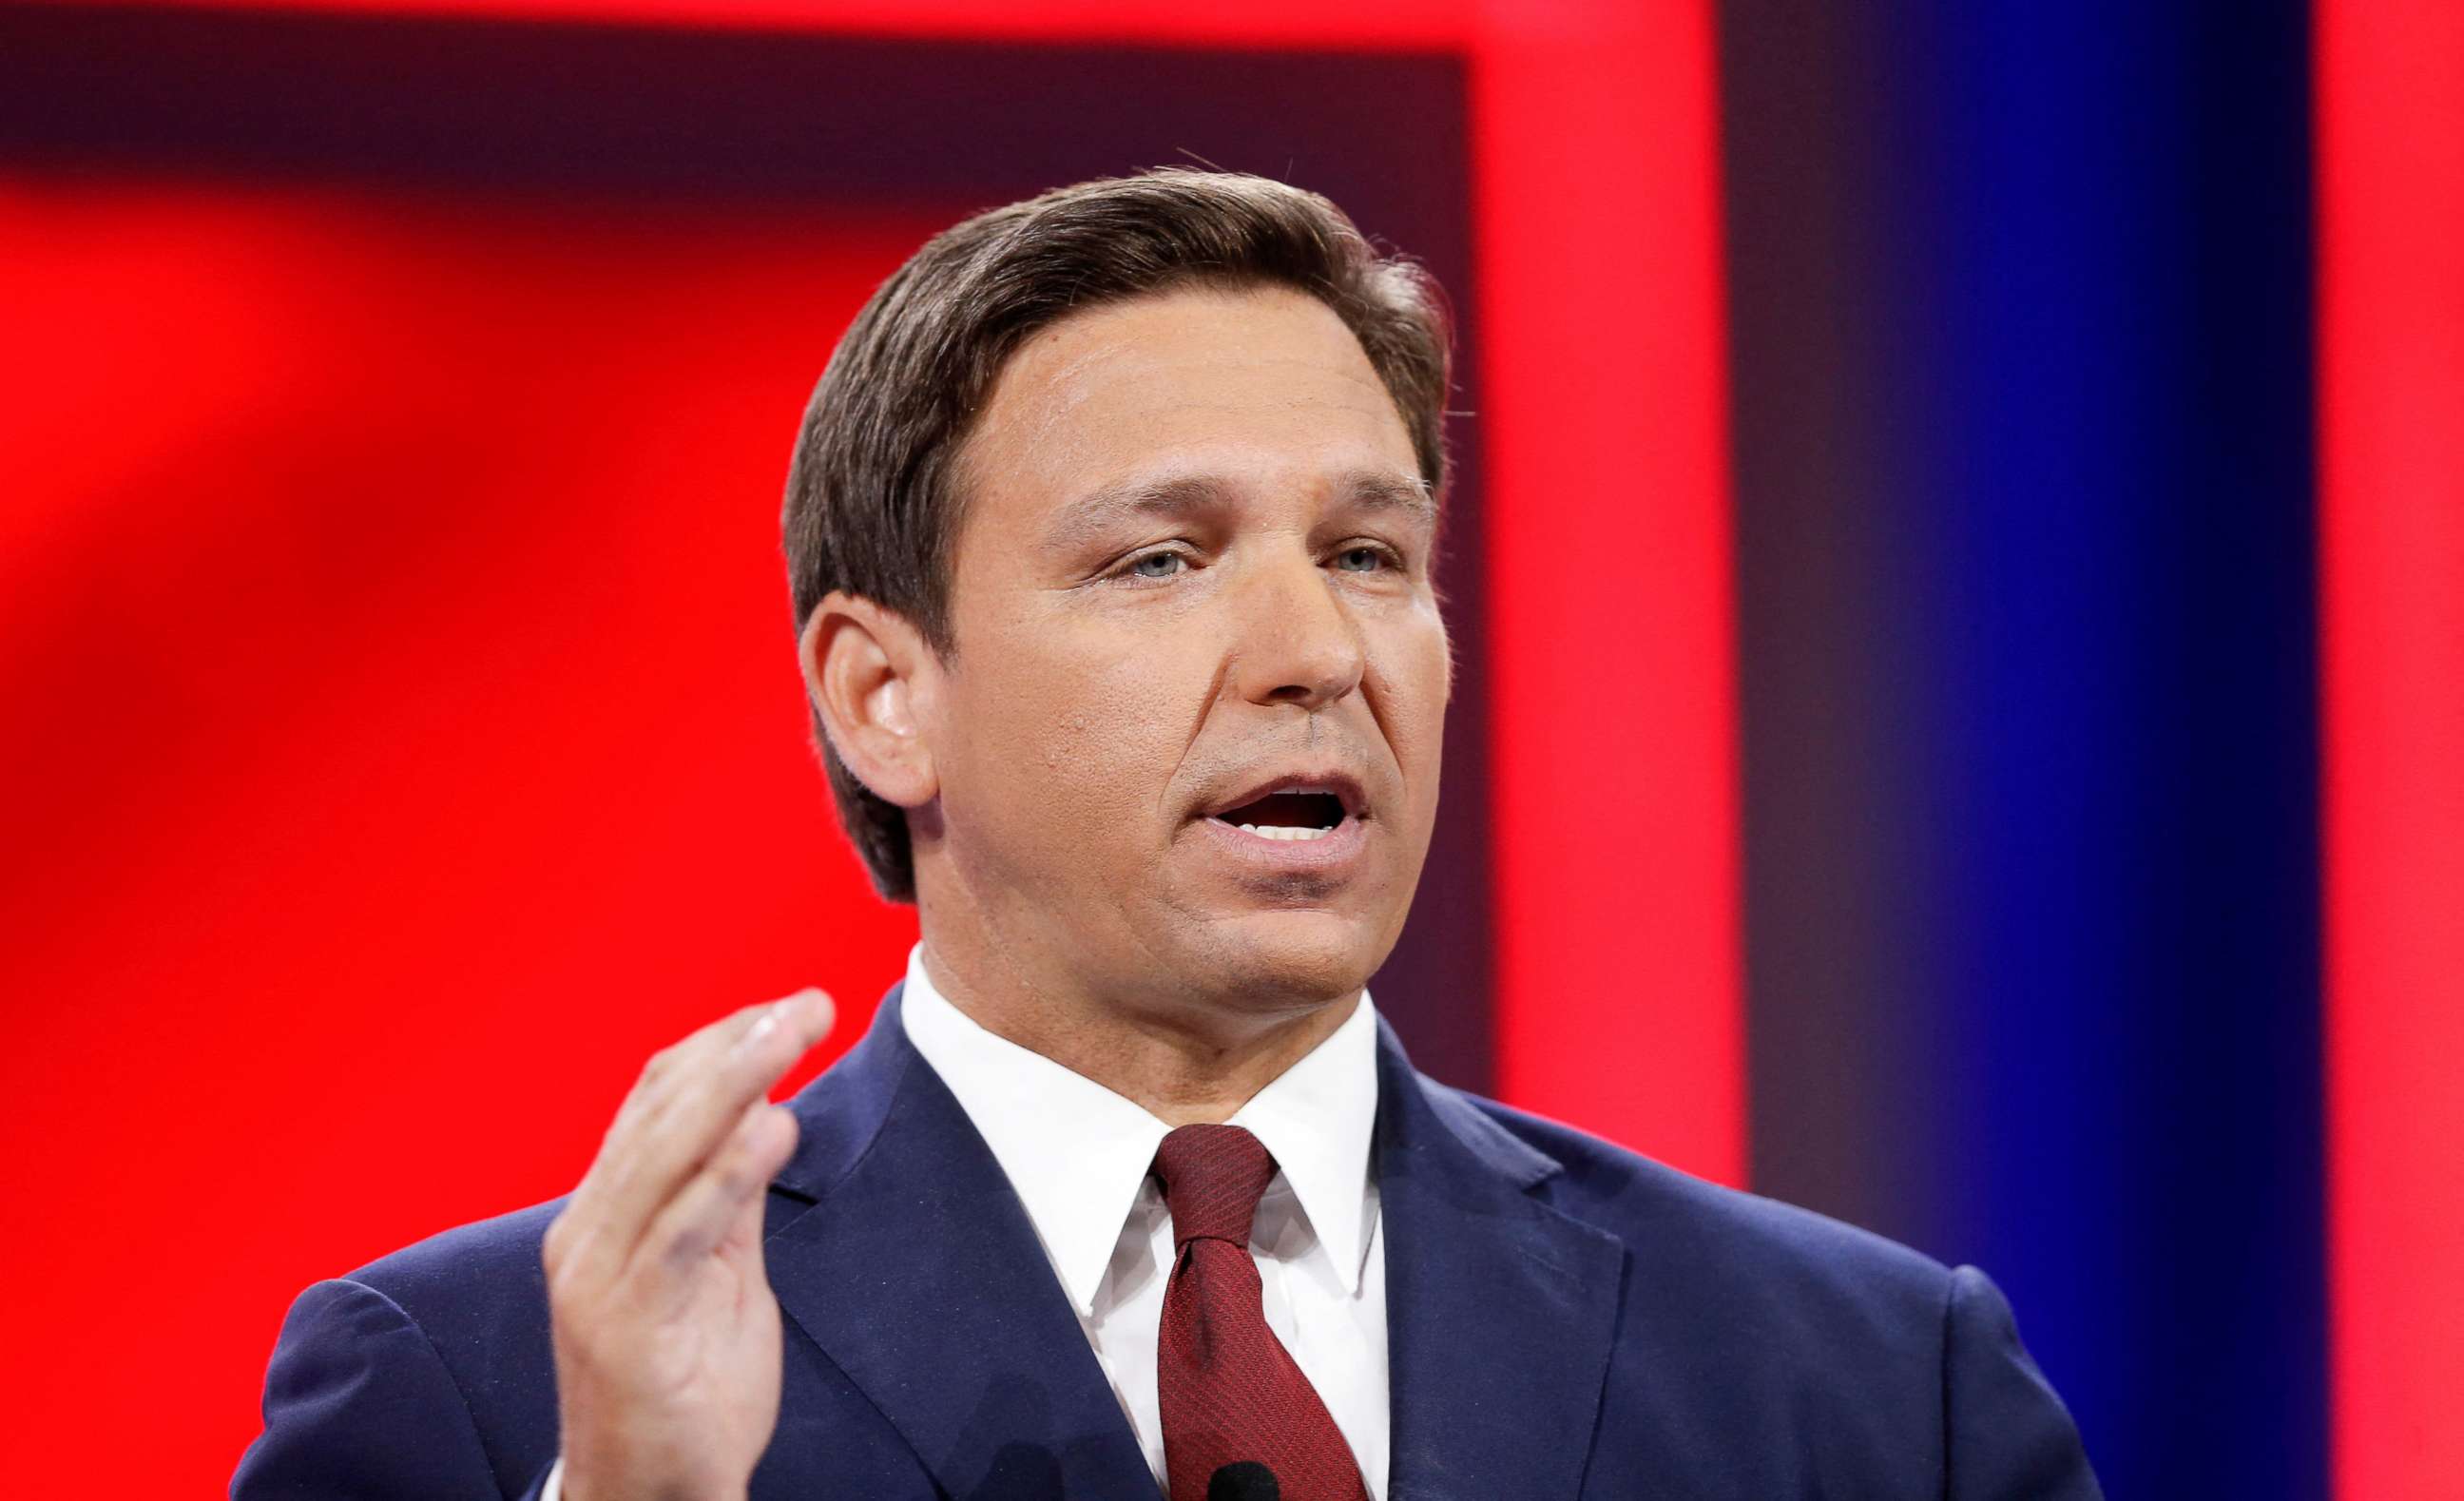 PHOTO: Florida Gov. Ron DeSantis speaks during the welcome segment of the Conservative Political Action Conference (CPAC) in Orlando, Florida, Feb. 26, 2021.